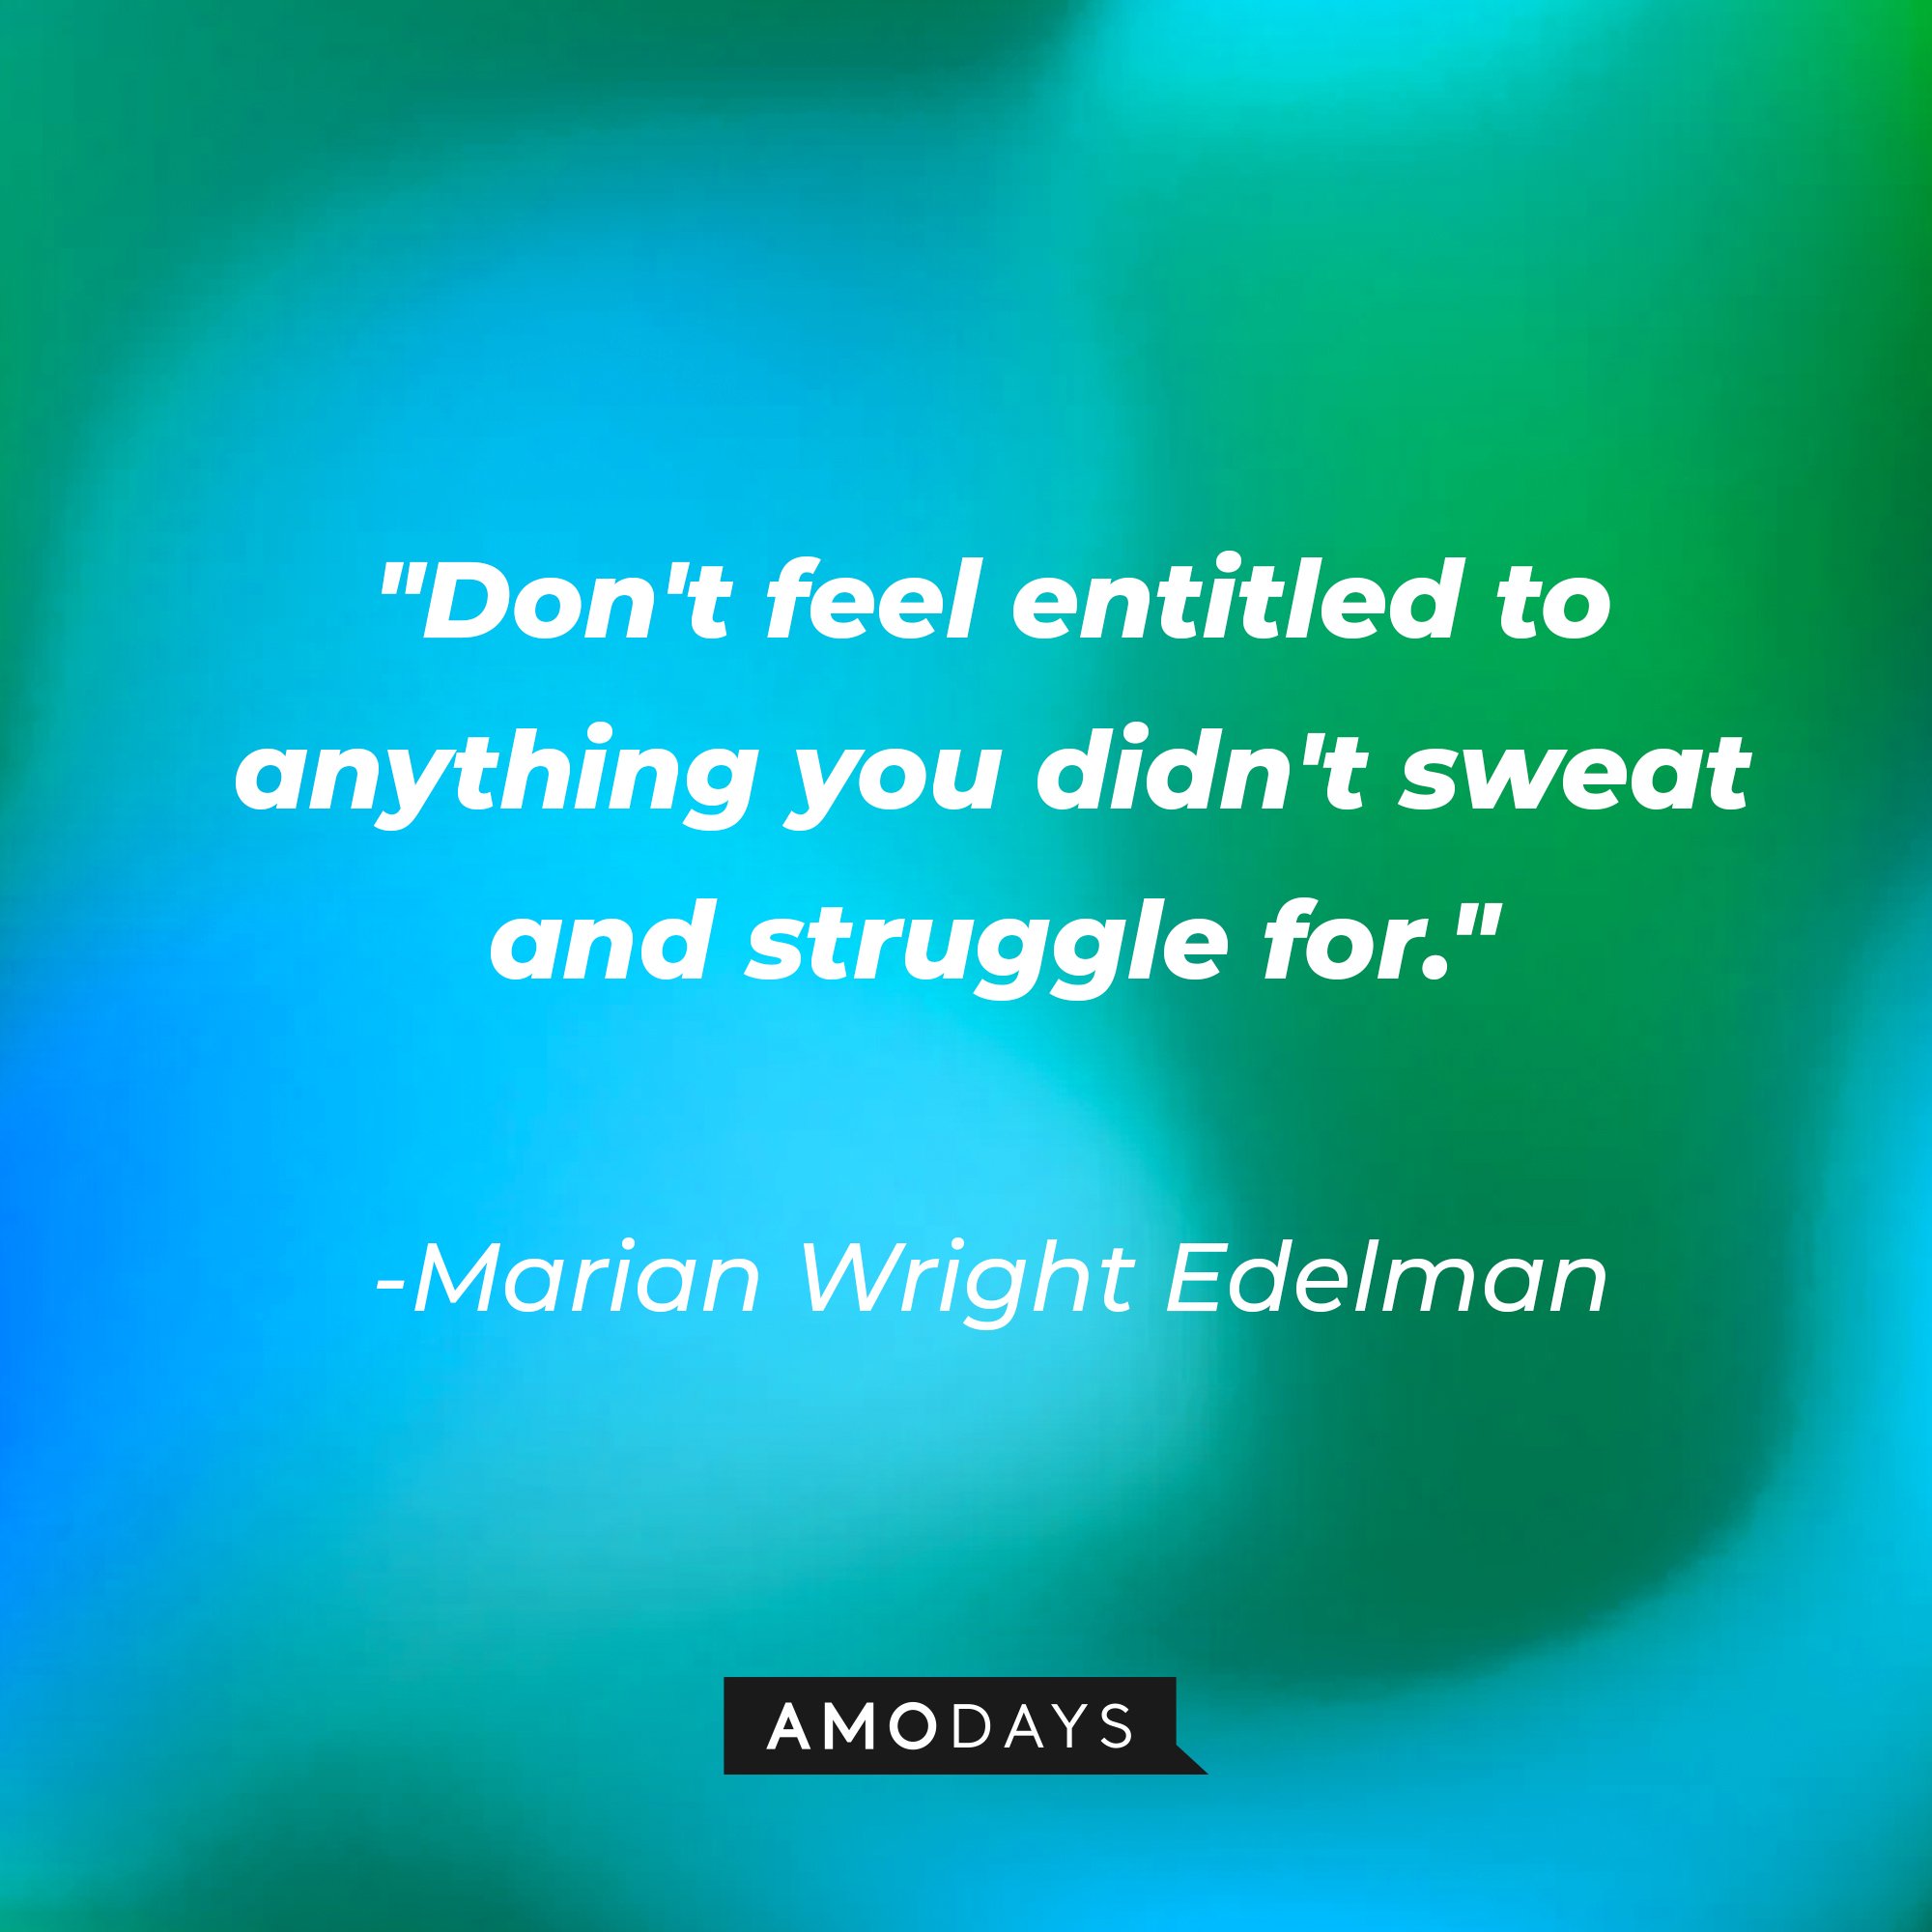 Marian Wright Edelman’s quote: "Don't feel entitled to anything you didn't sweat and struggle for." | Image: AmoDays